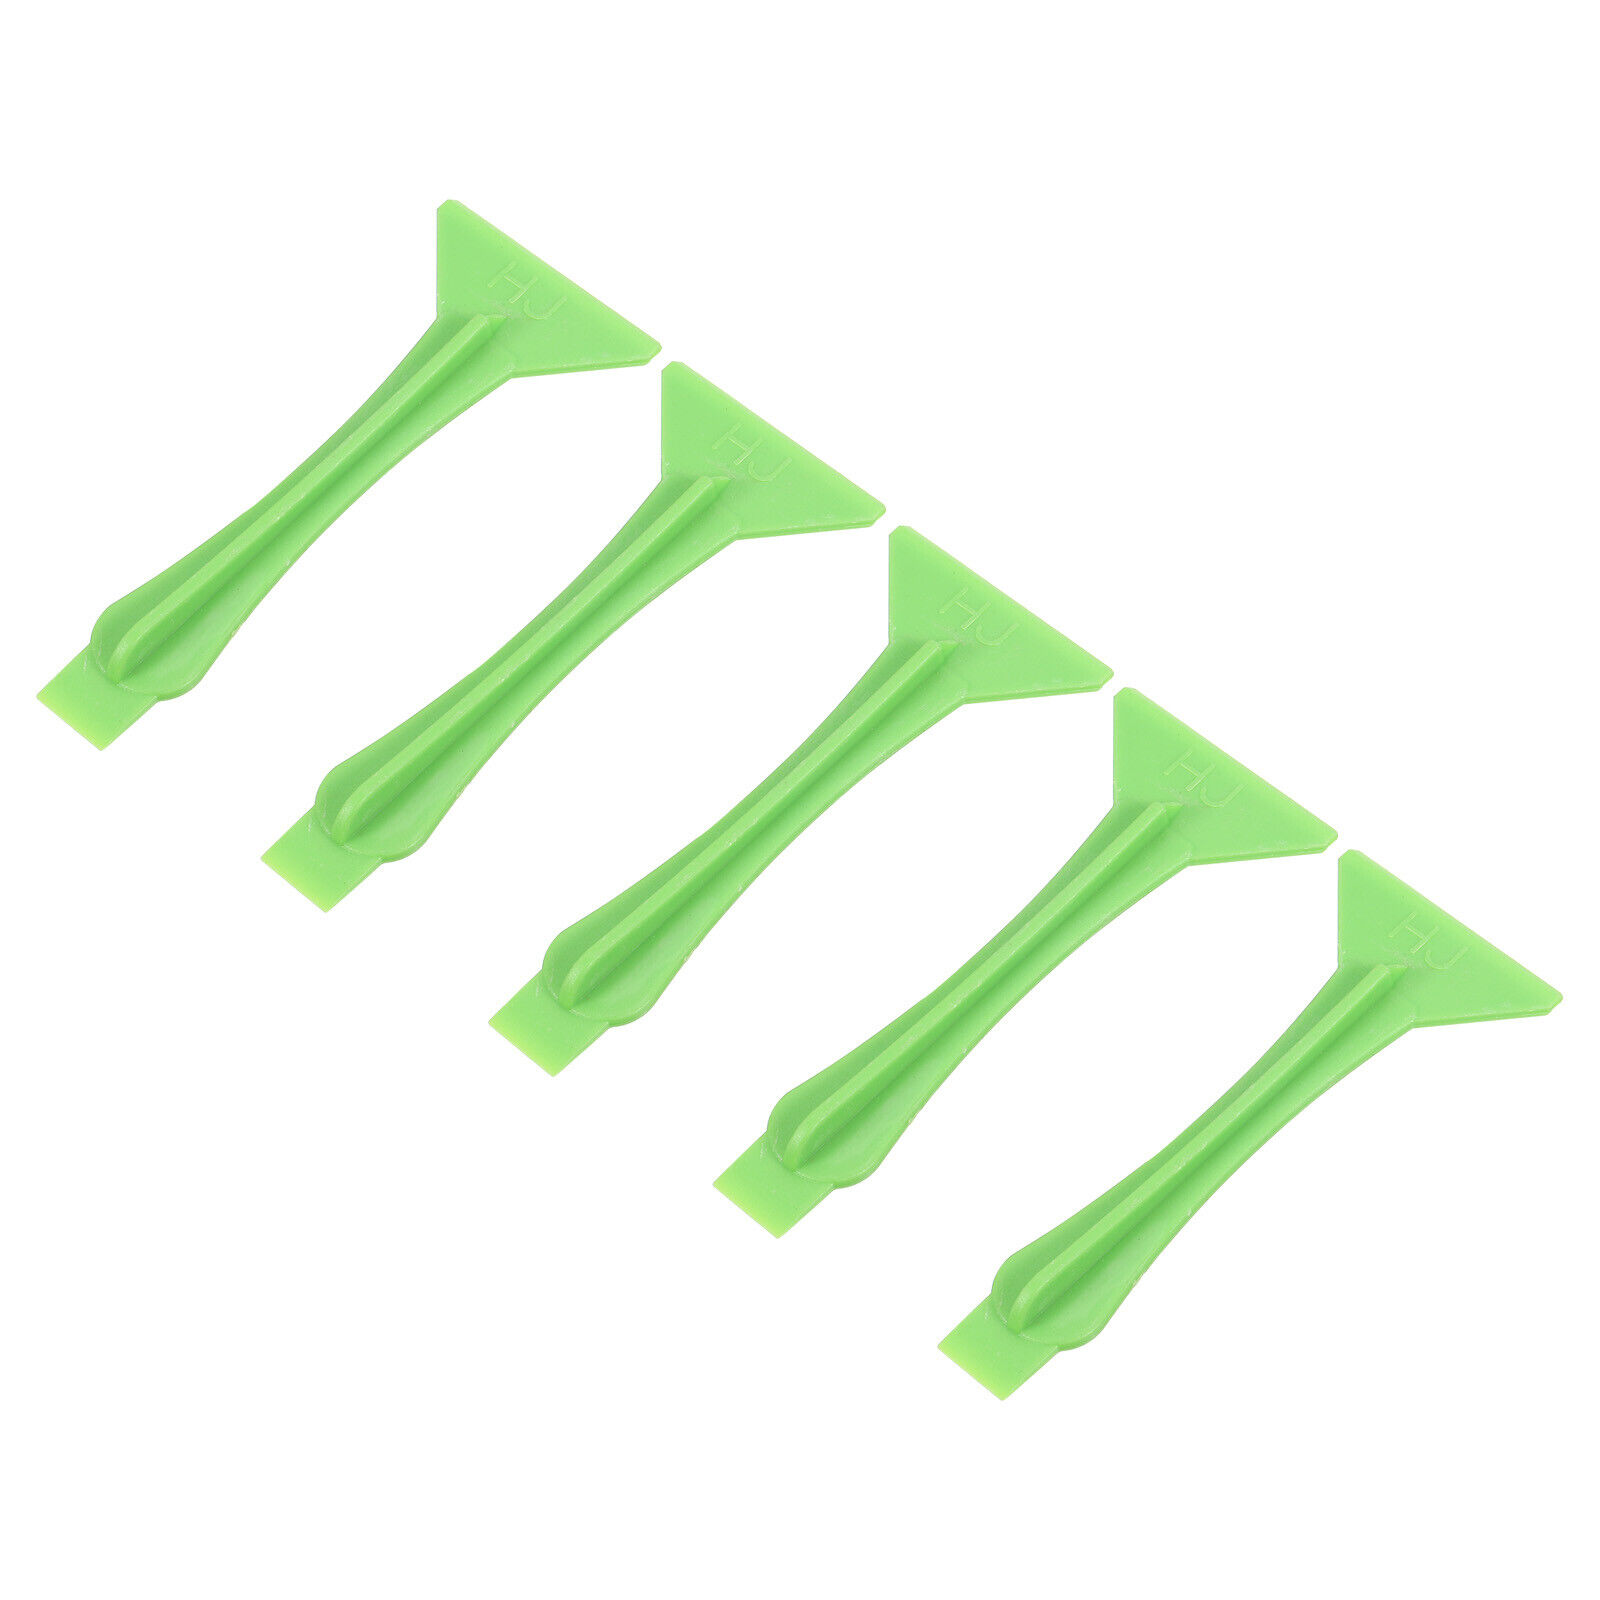 5pcs Universal Plastic Stick Spudger Crowbar Double Head Pry Opening Tools Green